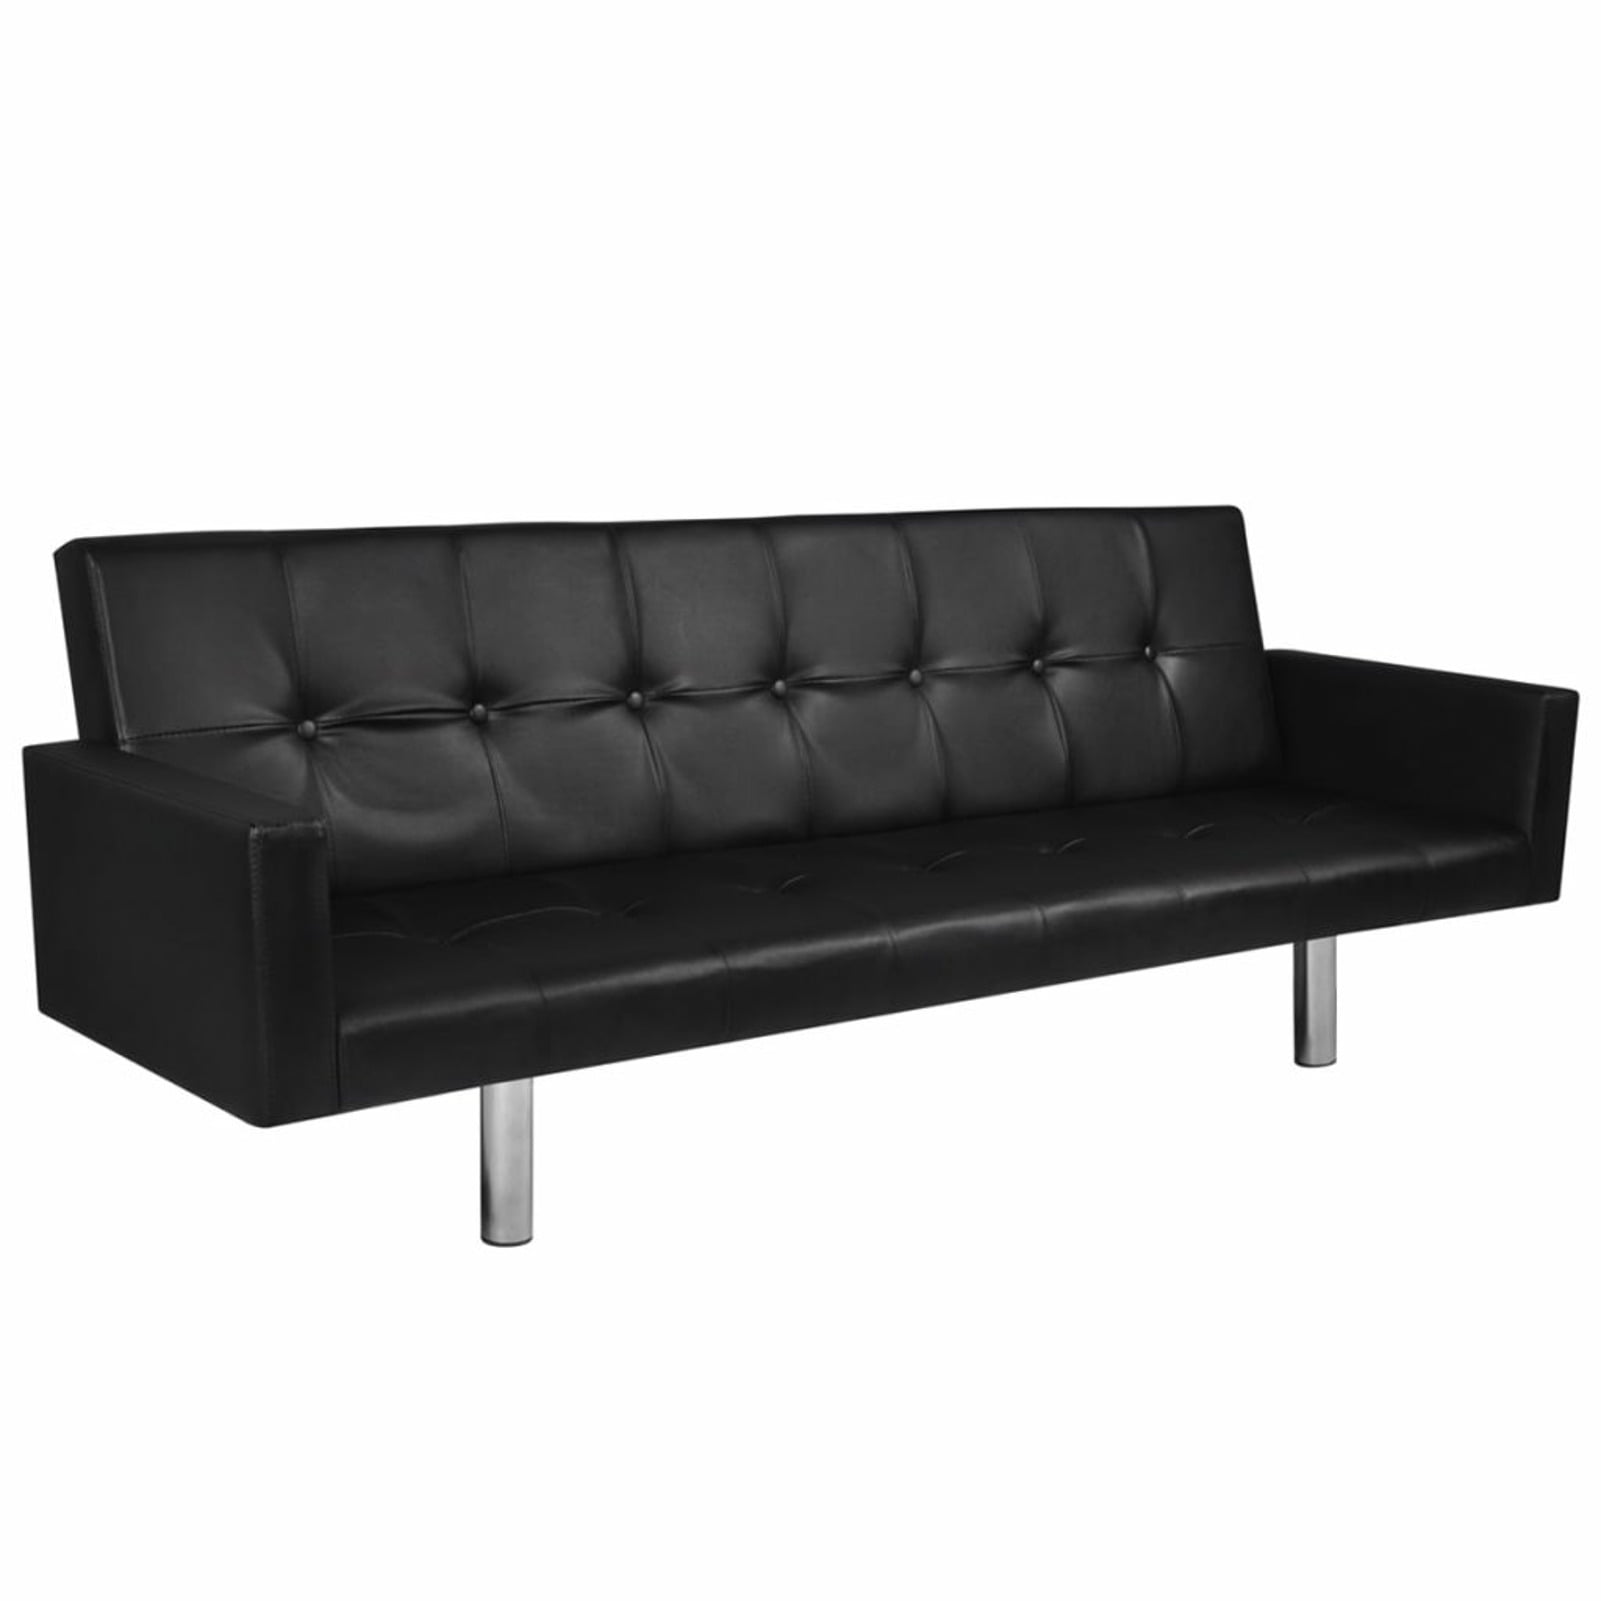 Details about   Sofa Bed w/ Armrest Faux Leather Furniture Living Room Black/White 